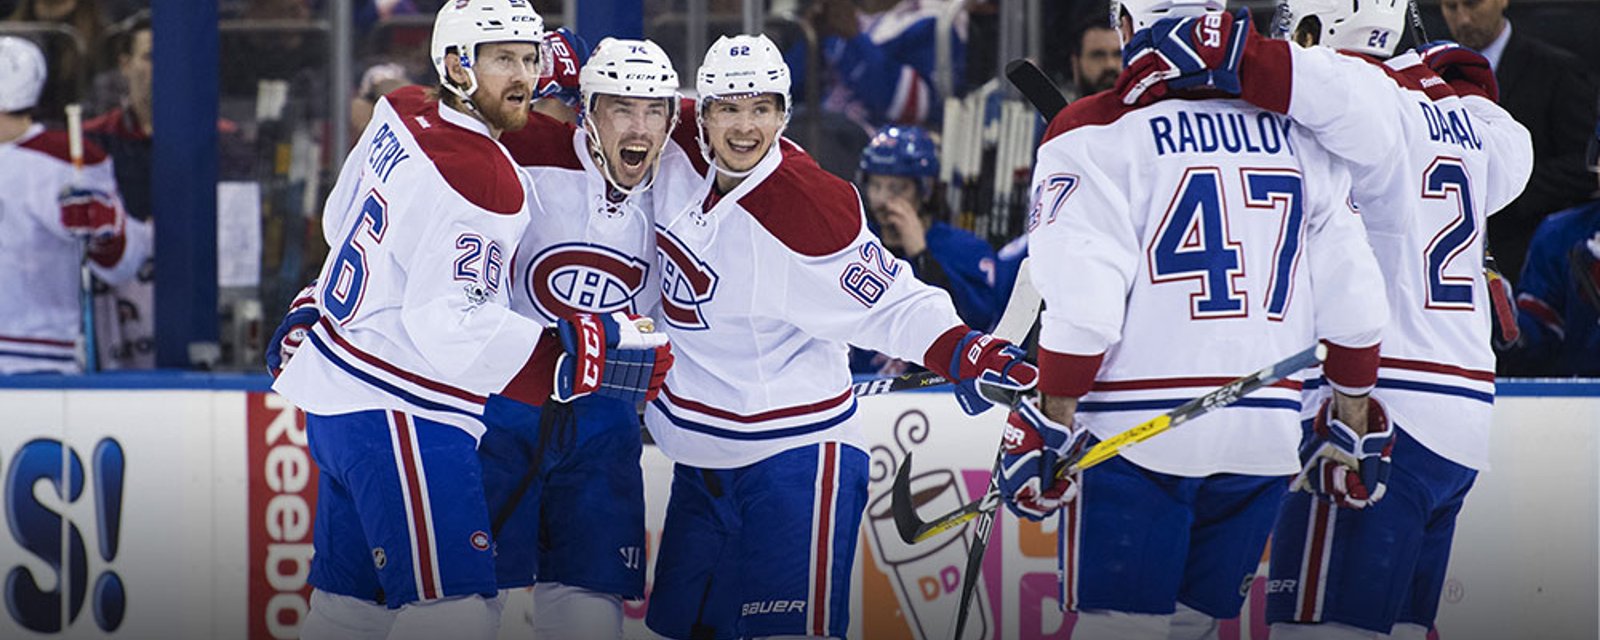 Breaking: Canadiens elect to expose high-priced veteran